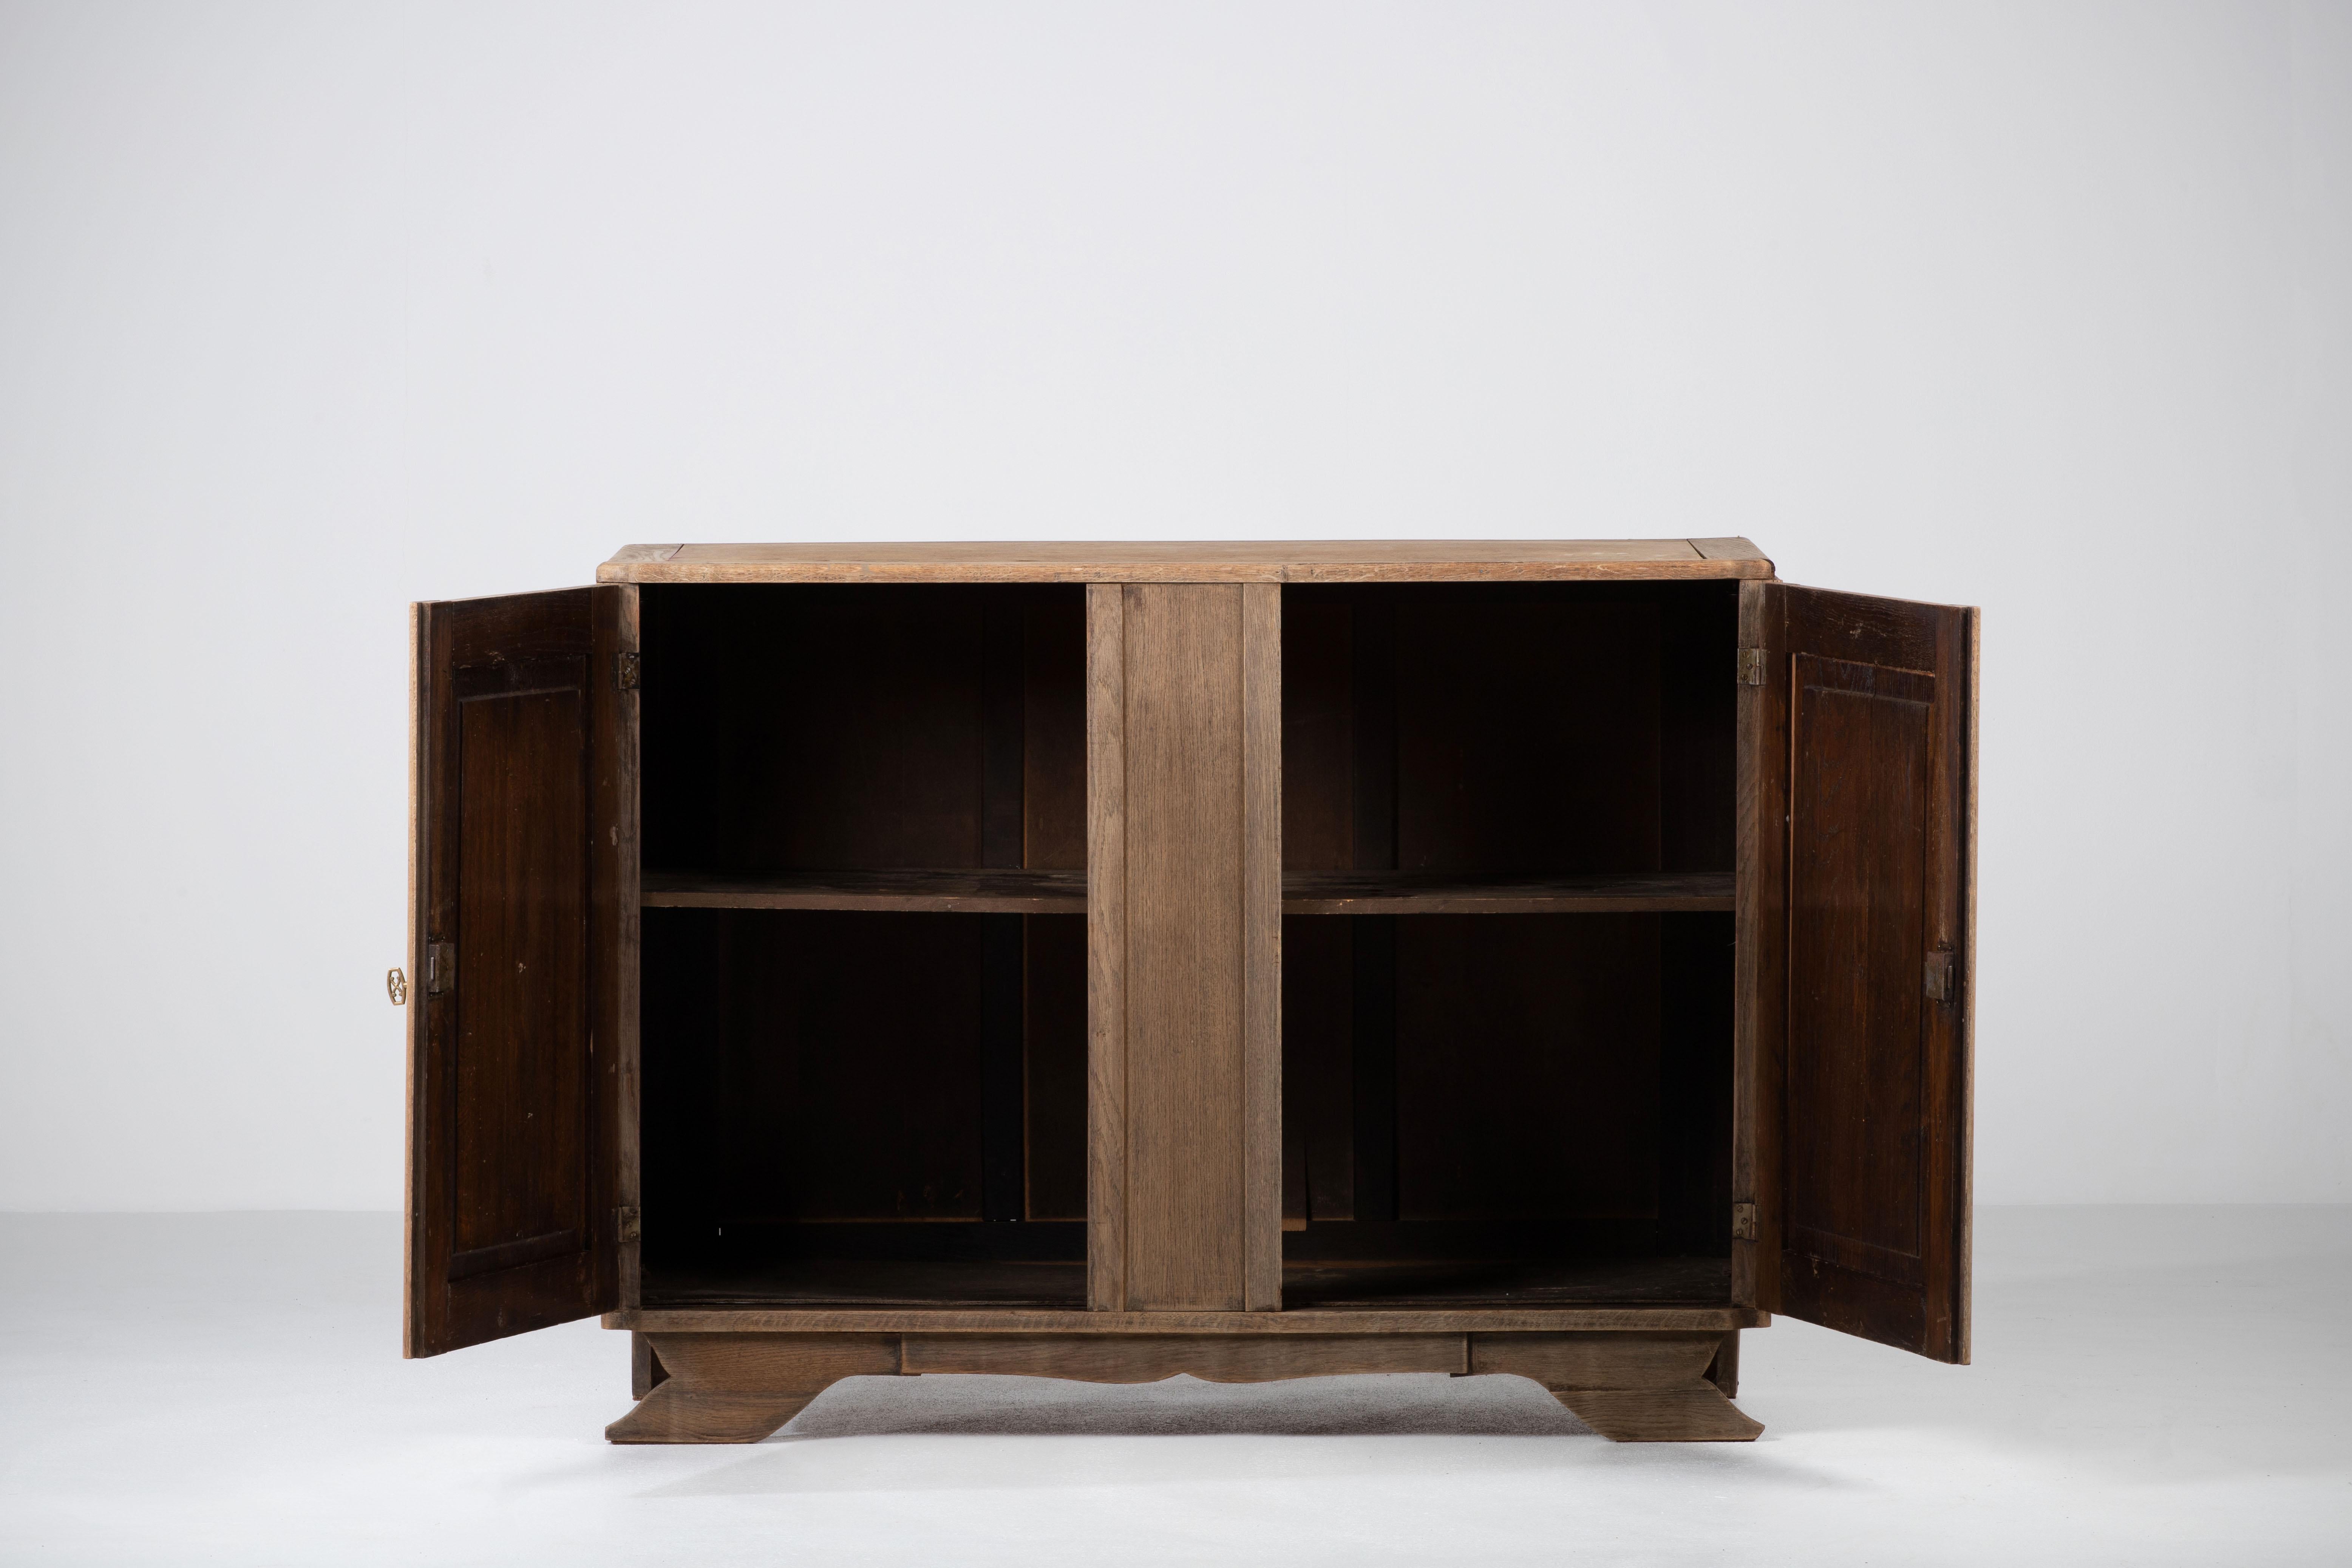 A sideboard/credenza presumably by Charles Dudouyt. 
France, c1930s.
Consists of two doors providing shelves storage compartments.
Signature graphic design doors make this piece really stand out.
The sideboard is in good original condition, with